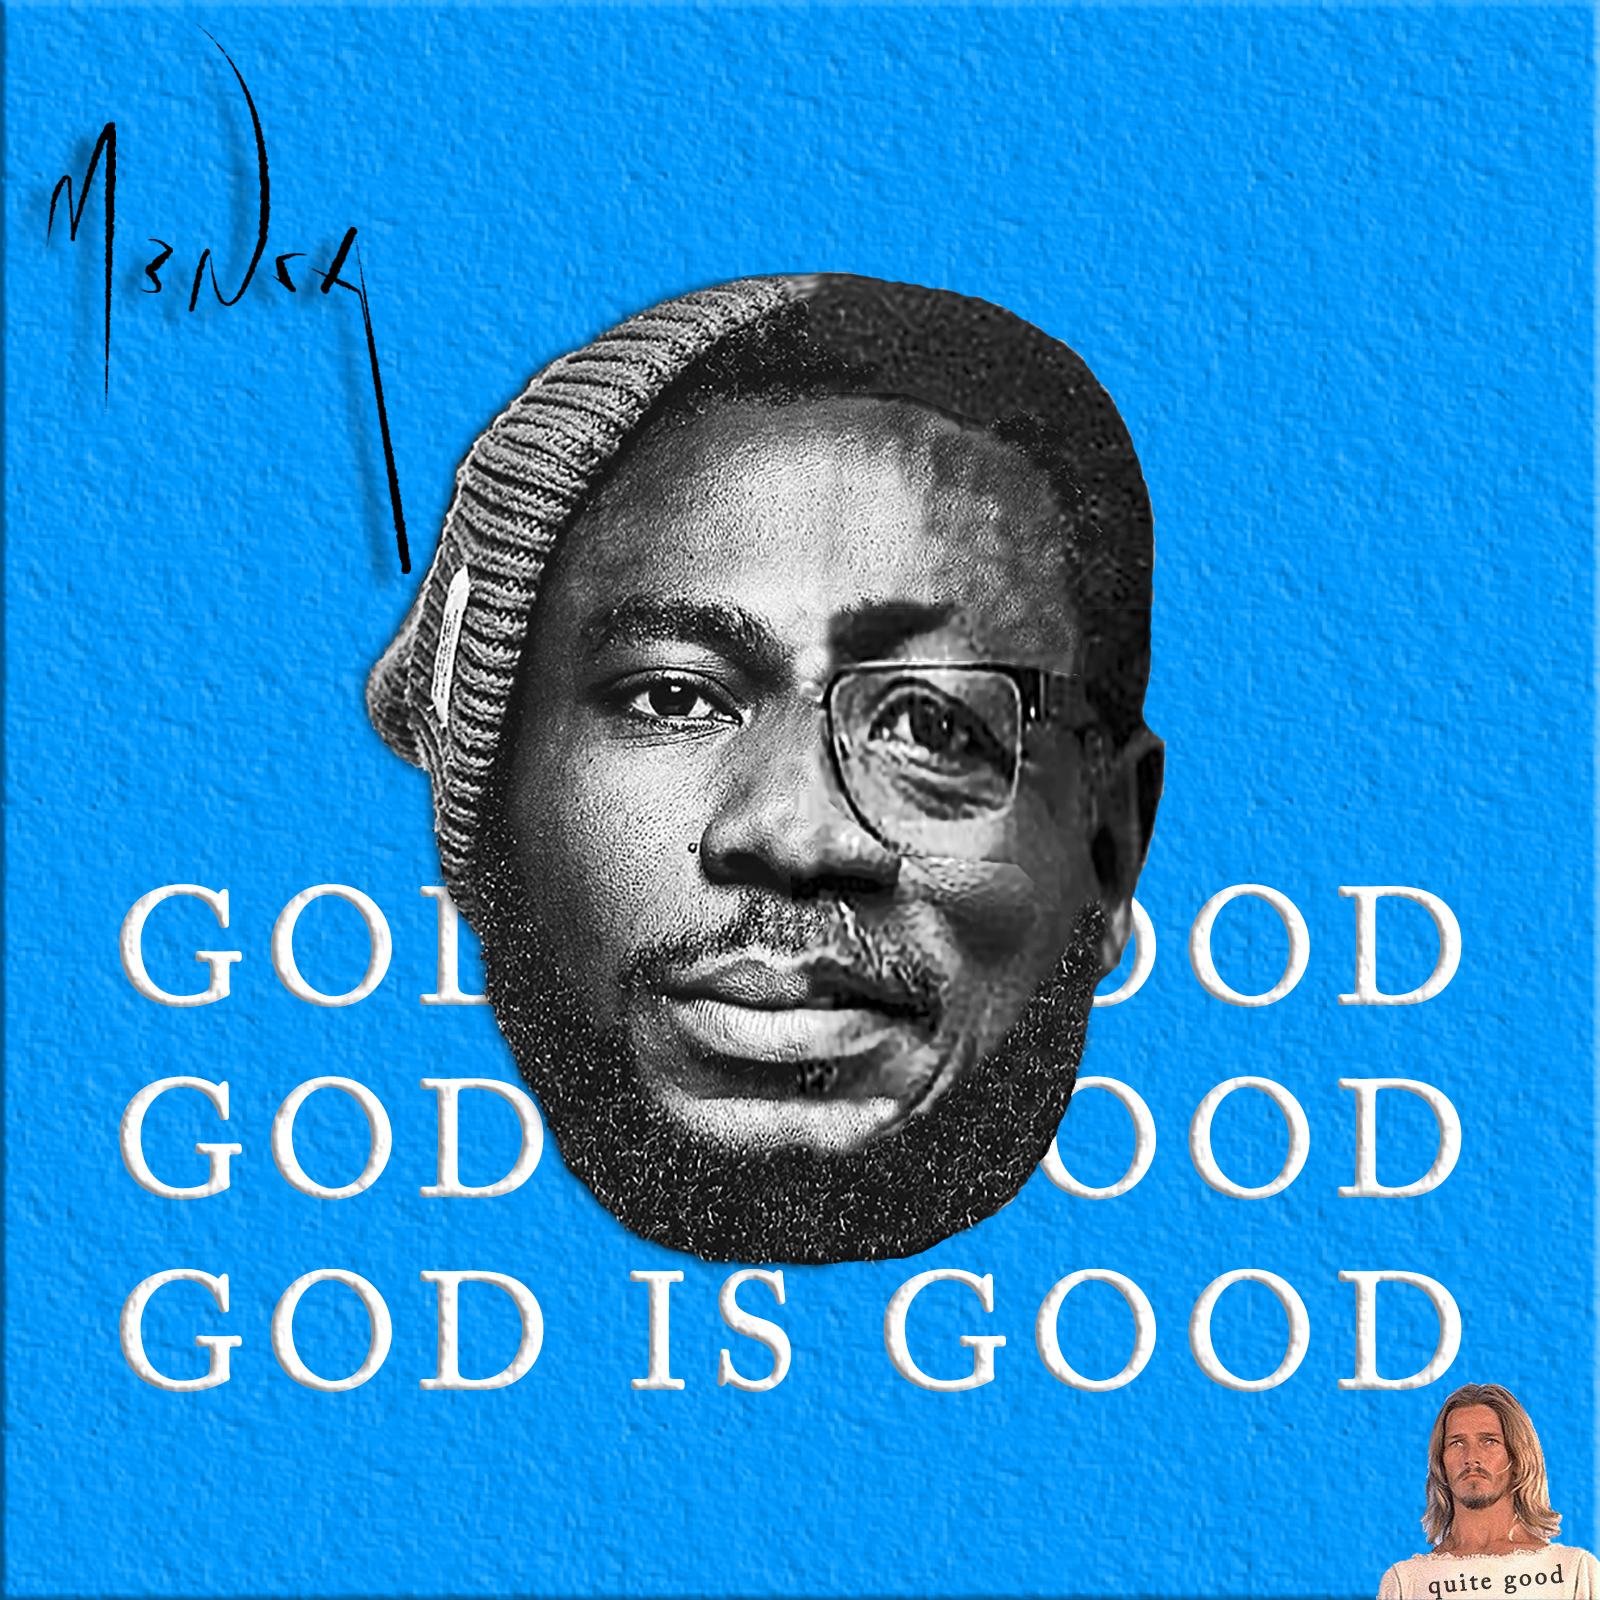 God Is Good by M3nsa